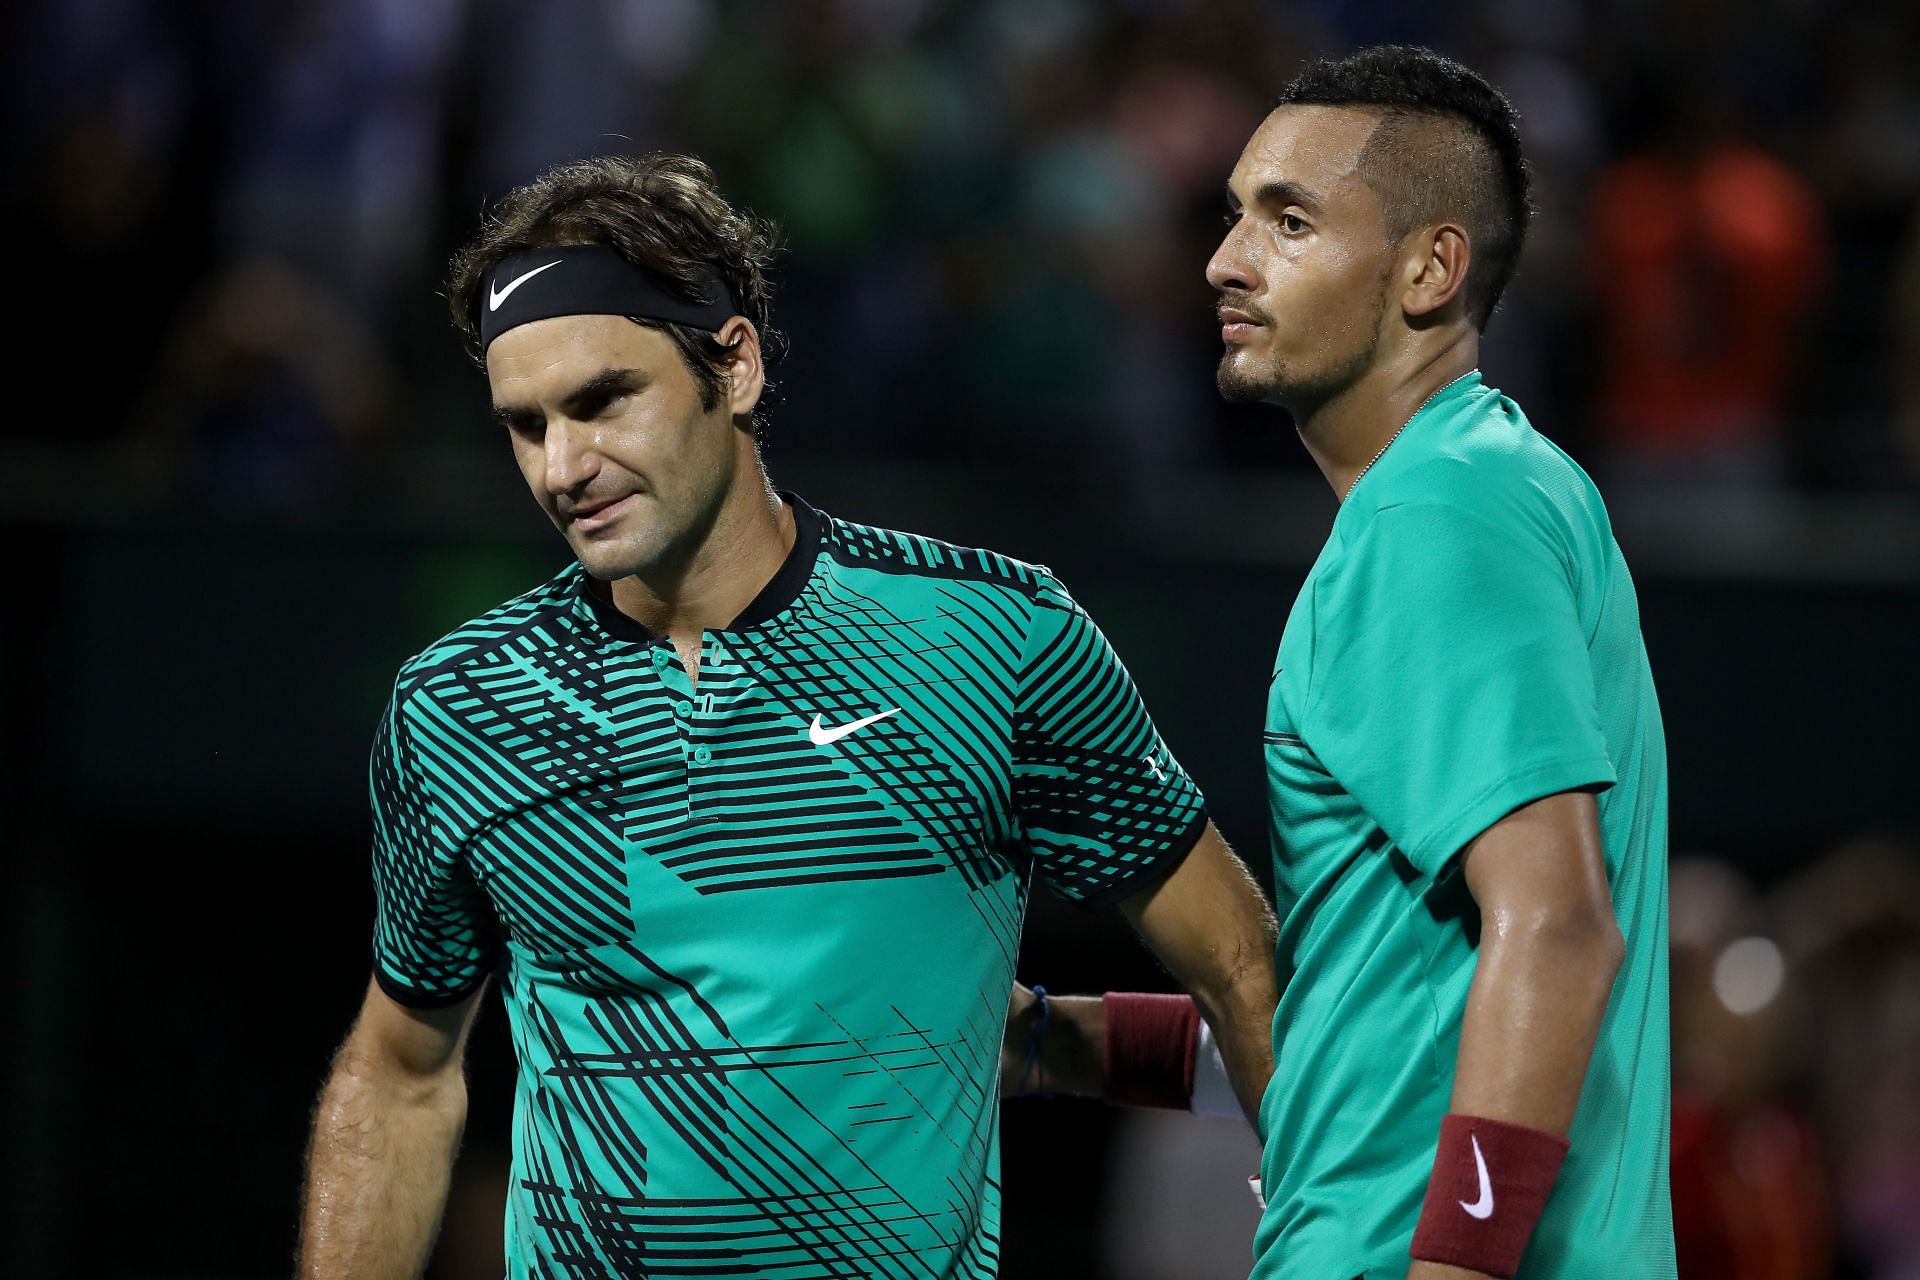 Roger Federer and Nick Kyrgios at the 2017 Miami Open